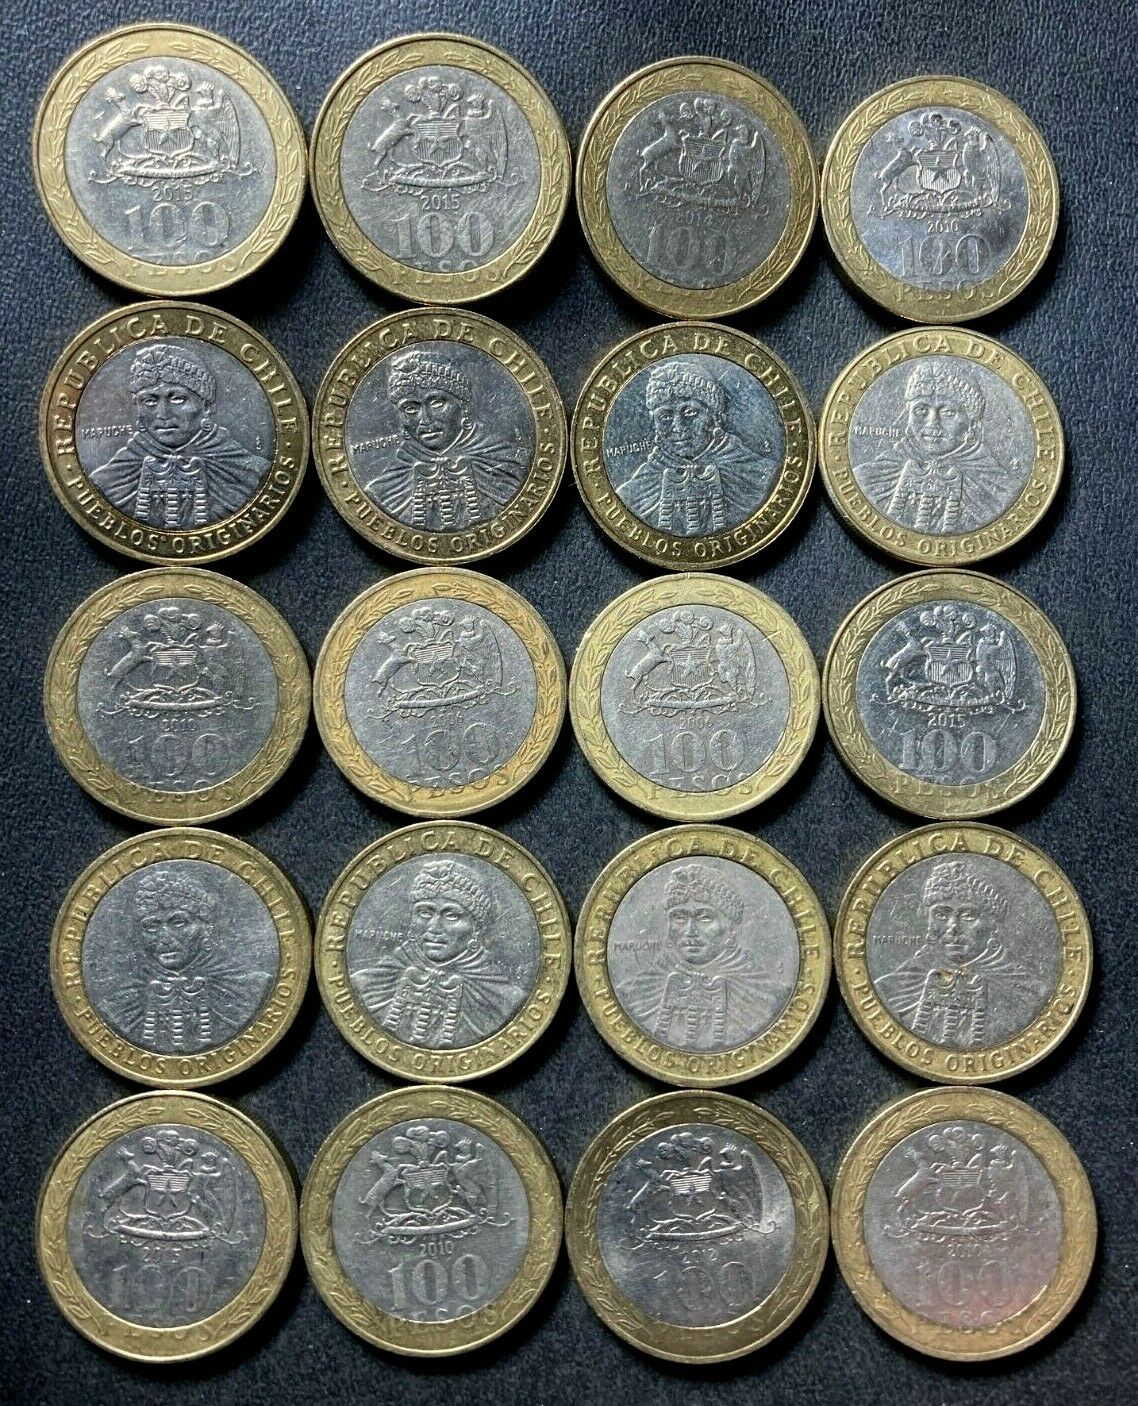 Old Chile Coin Lot - 100 PESOS - High Quality Coins - Bi-Metal - Lot #S28